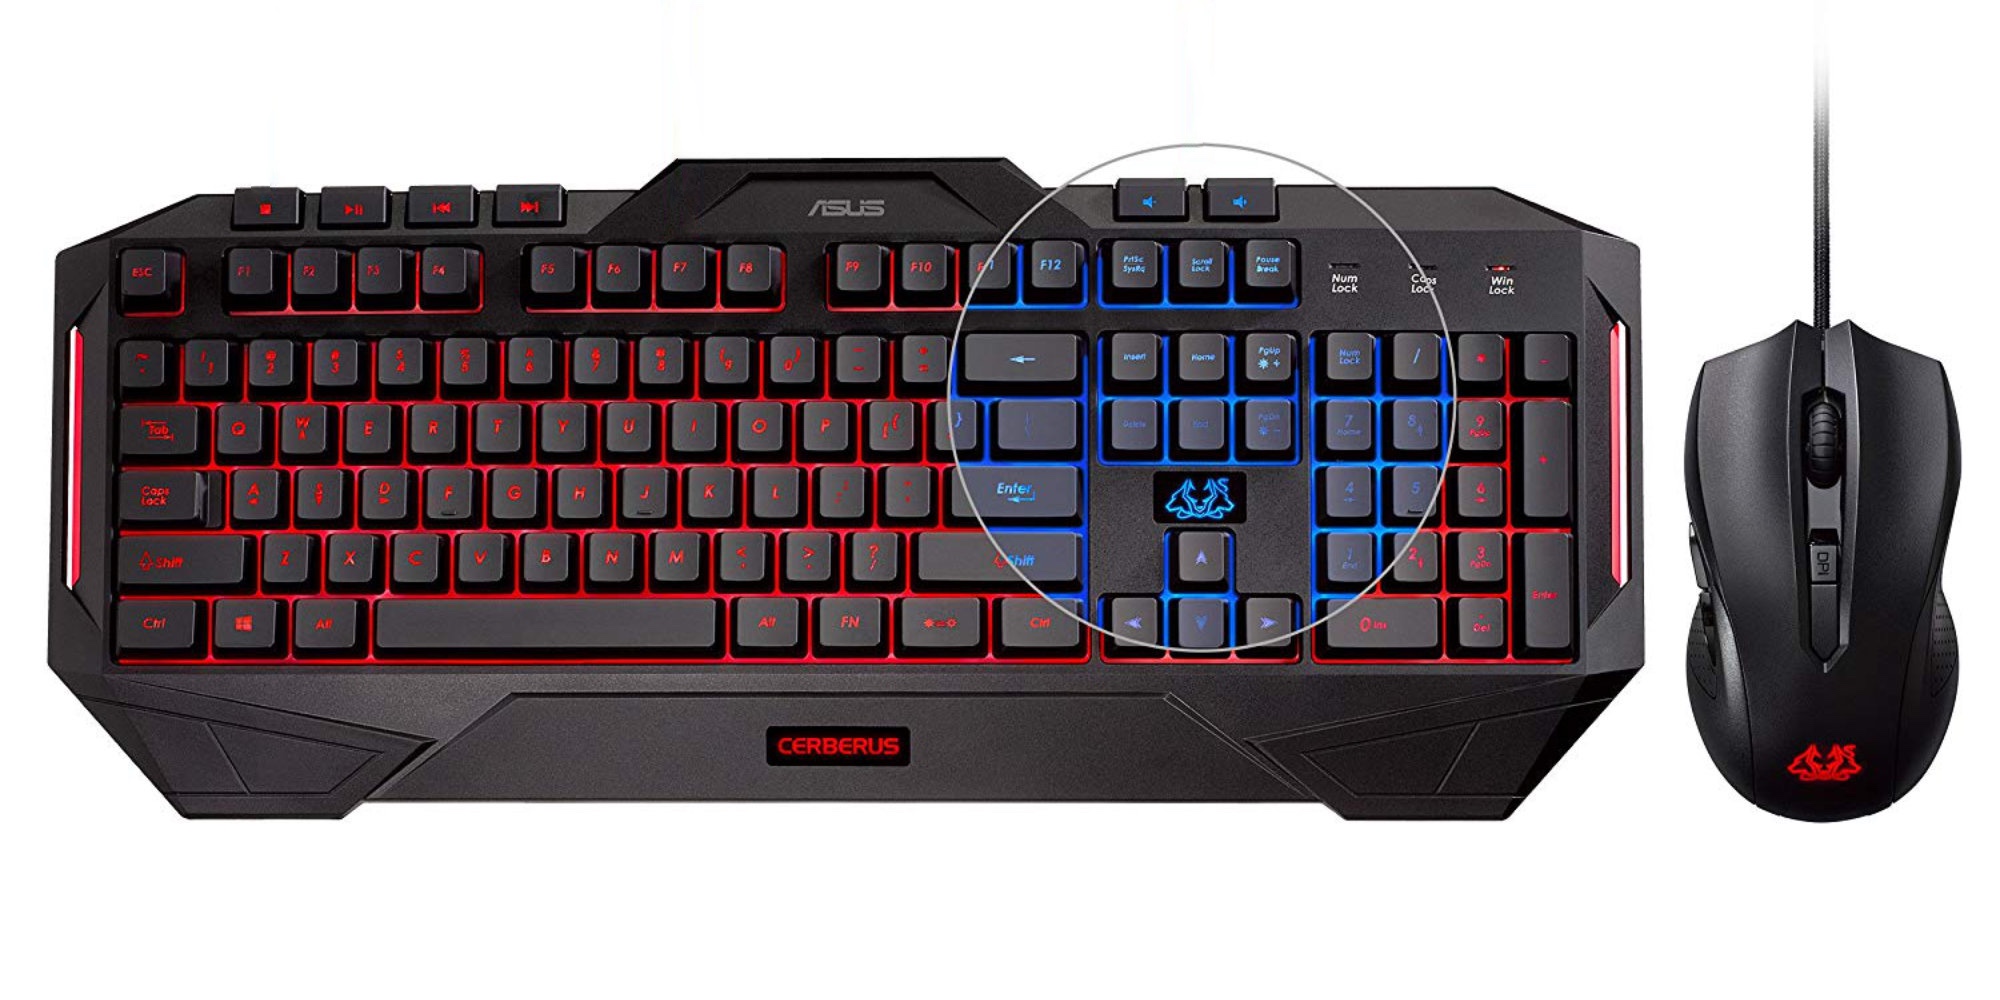 Snag The Asus Cerberus Gaming Keyboard Mouse For 50 At Amazon Reg 70 9to5toys